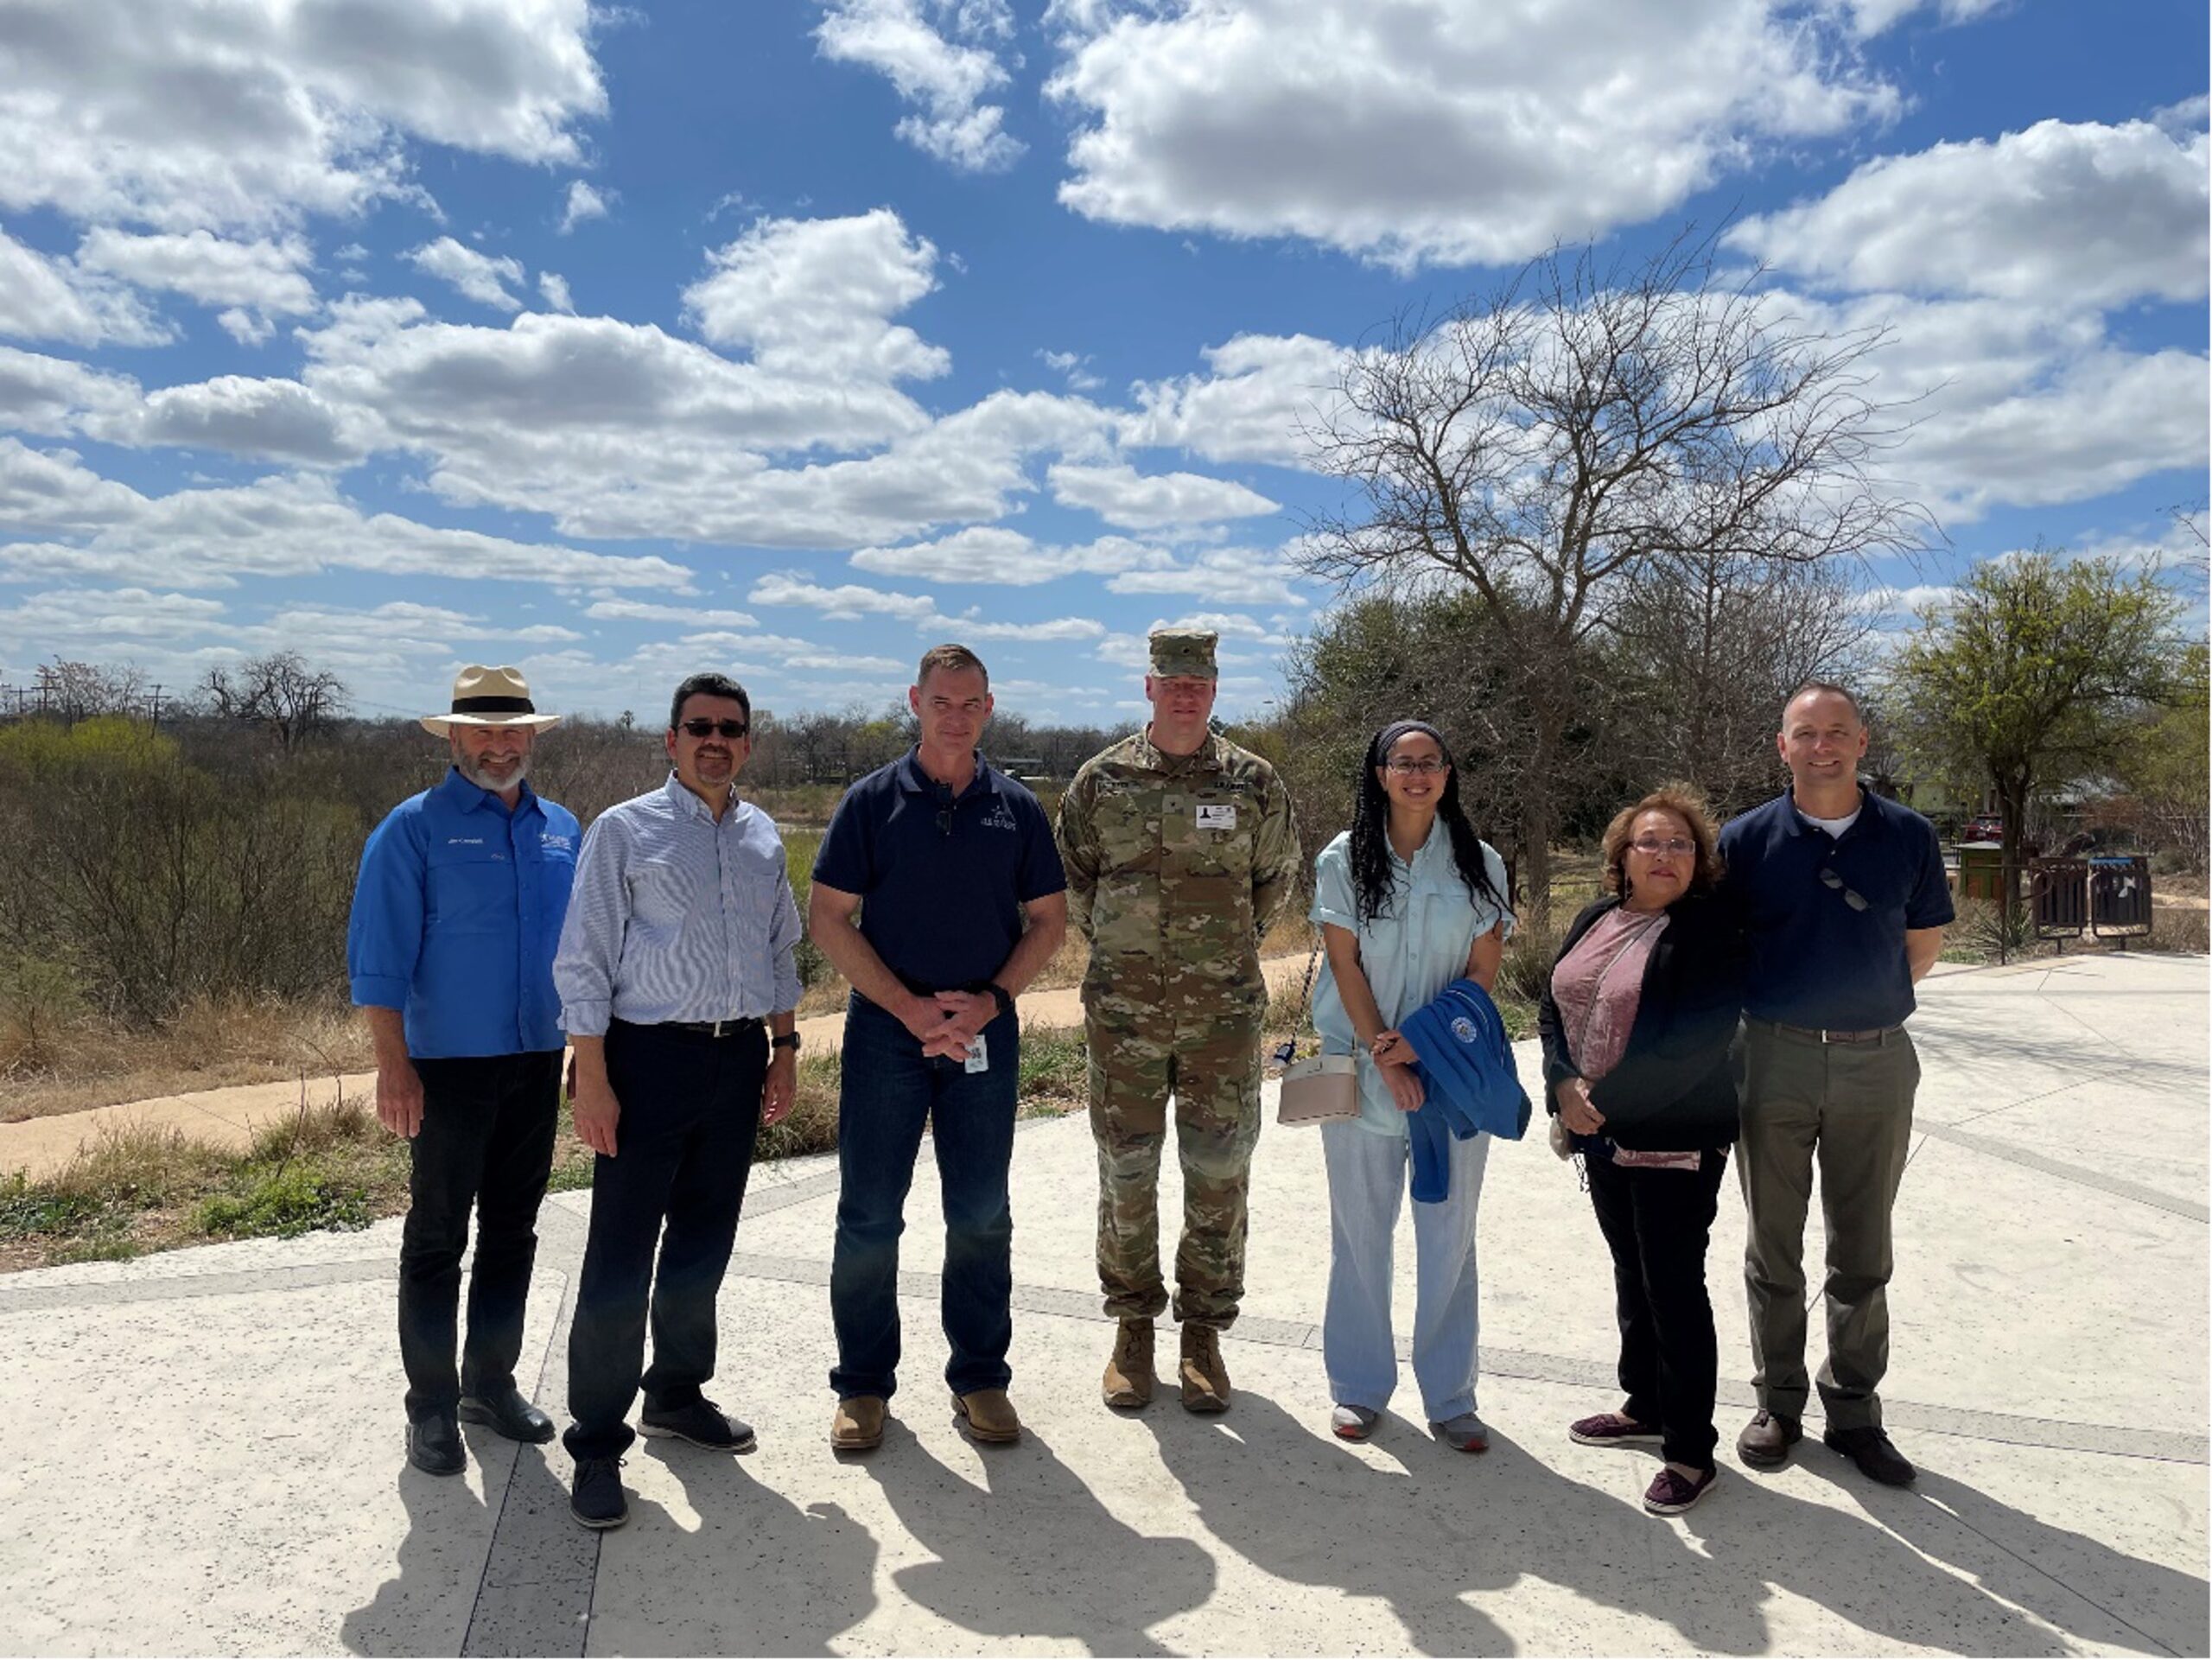 US Army Corps of Engineers, the Bexar County Commissioners Court, and the River Authority's Board visit Westside Creeks